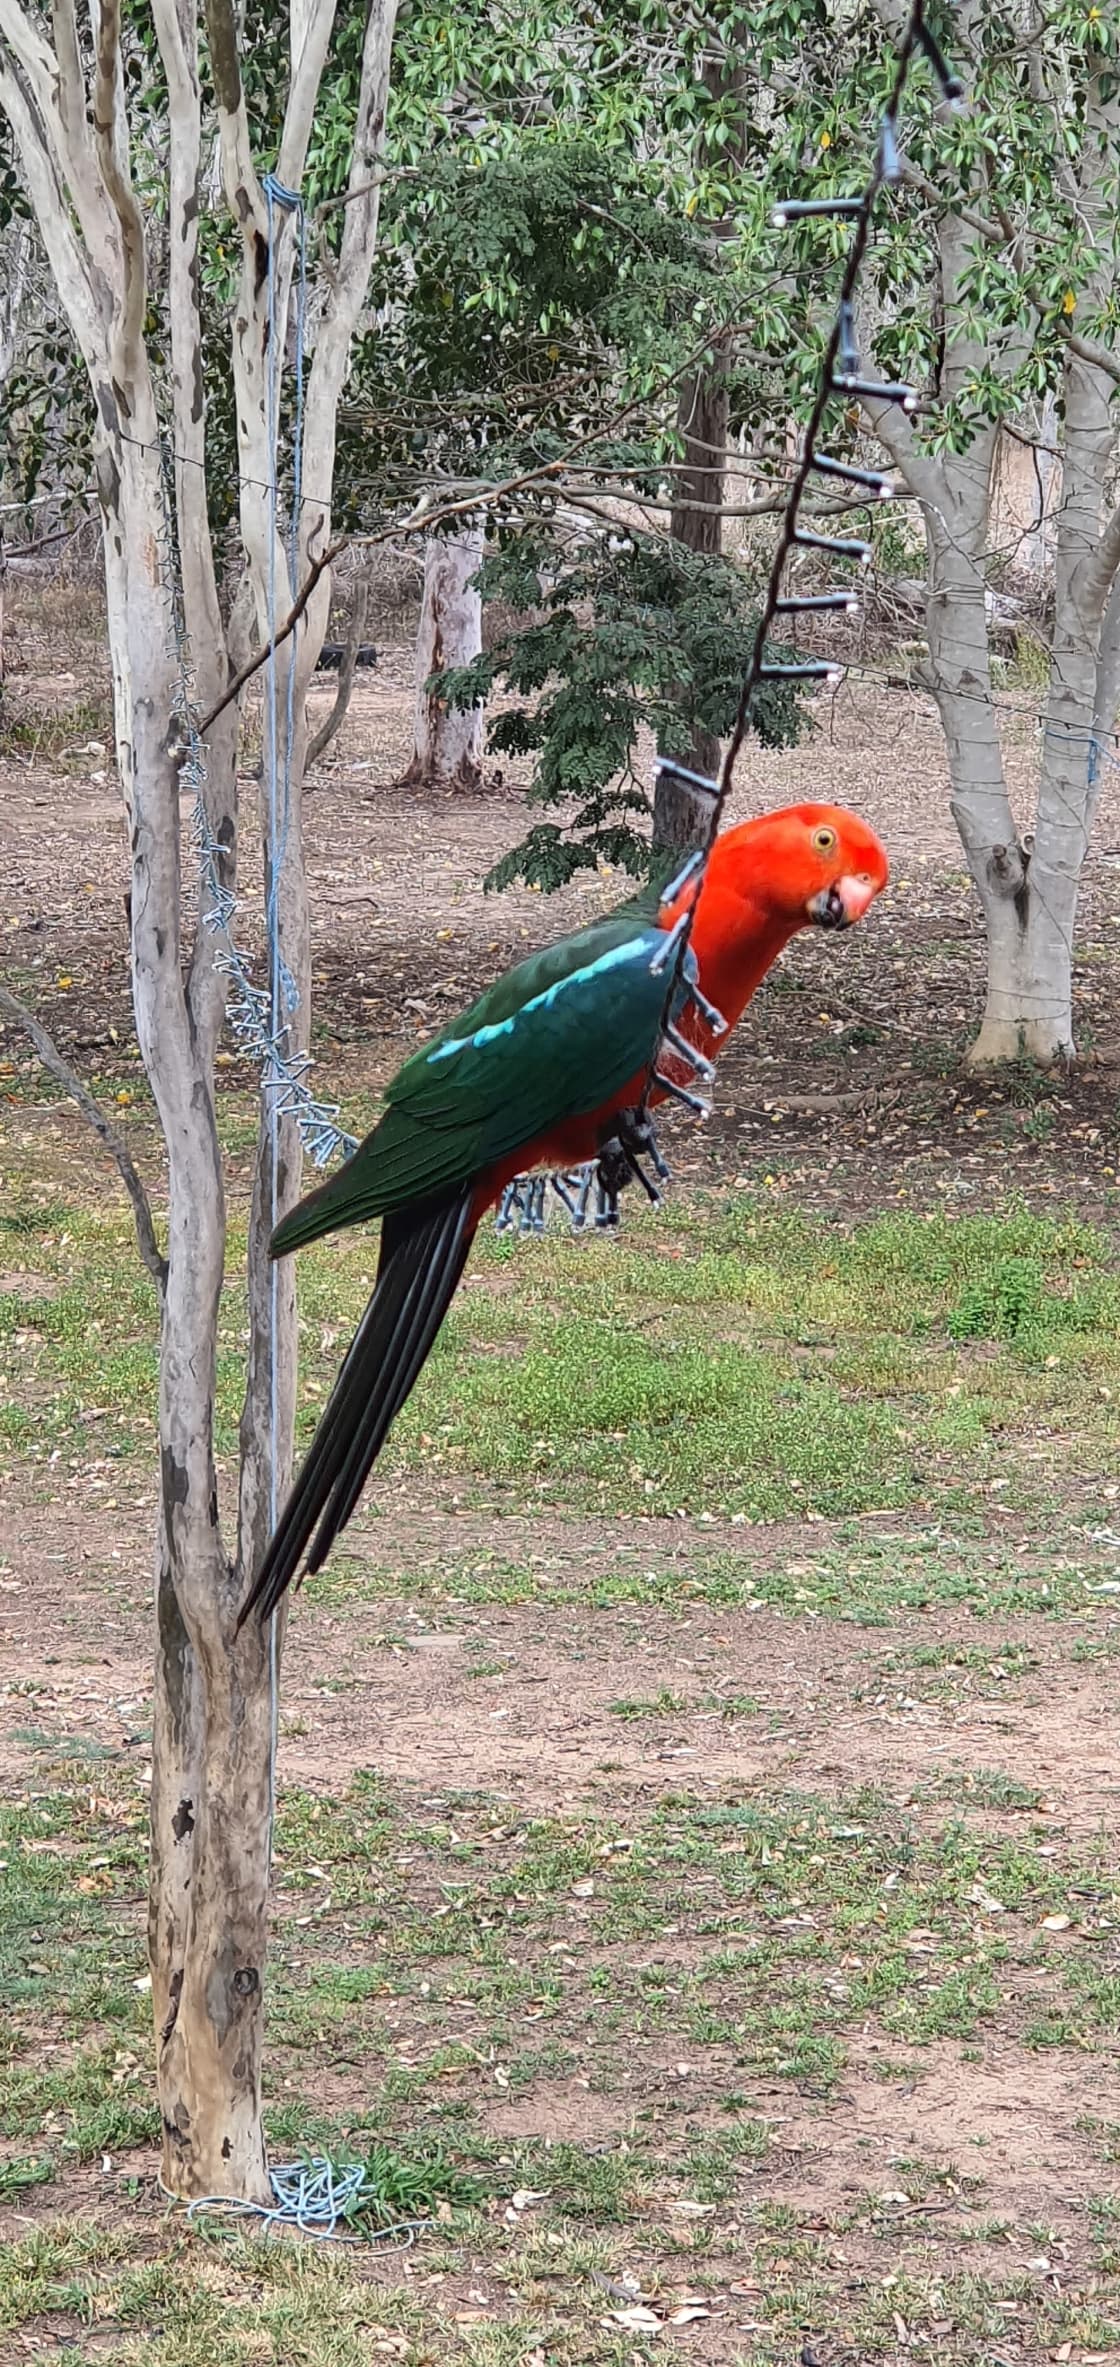 Lot os King Parrots, Whip Birds and other species all year round.